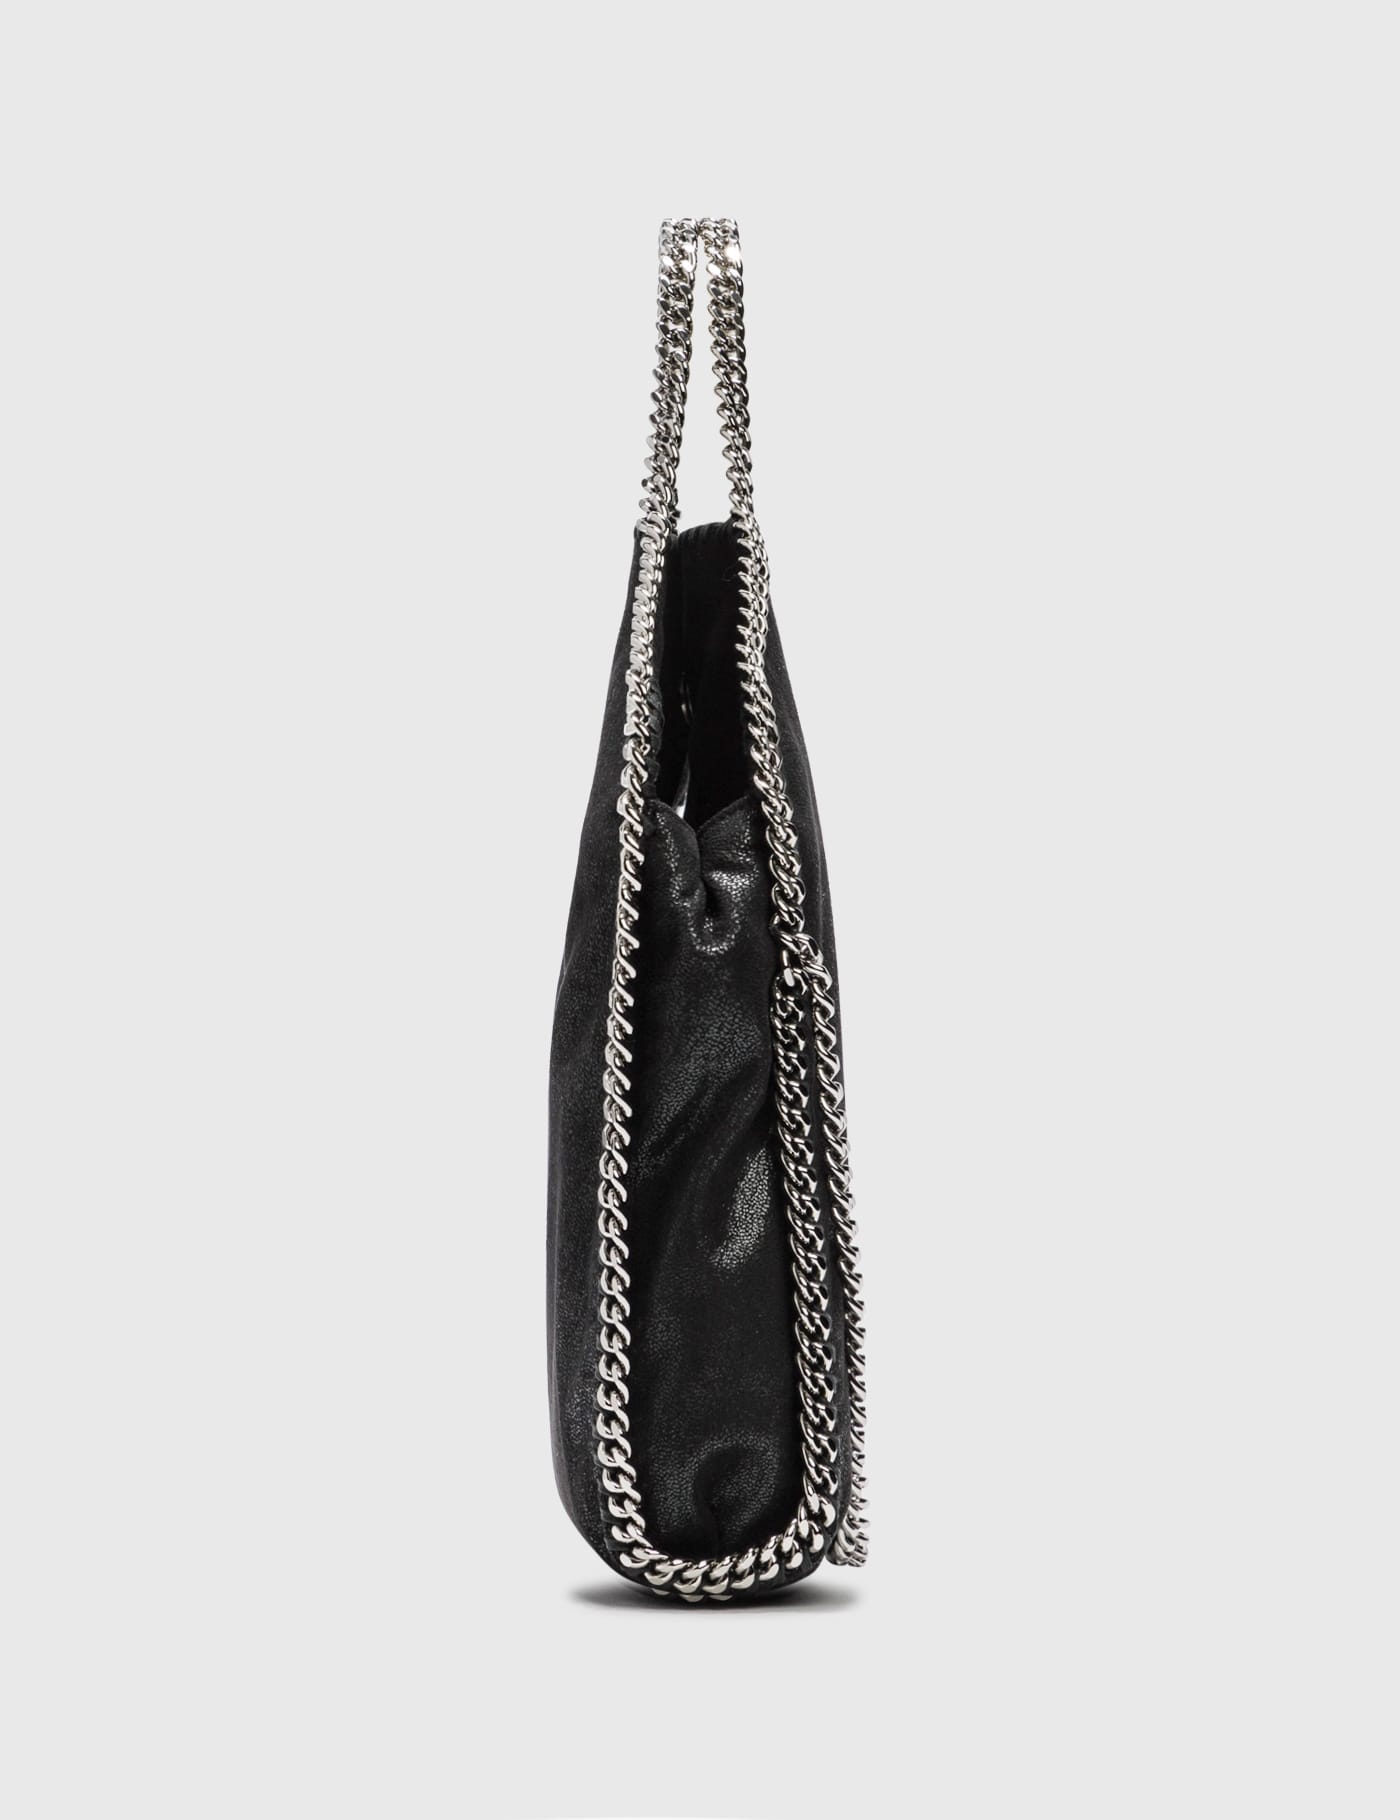 Stella McCartney - Falabella Fold-Over Tote | HBX - Globally Curated  Fashion and Lifestyle by Hypebeast